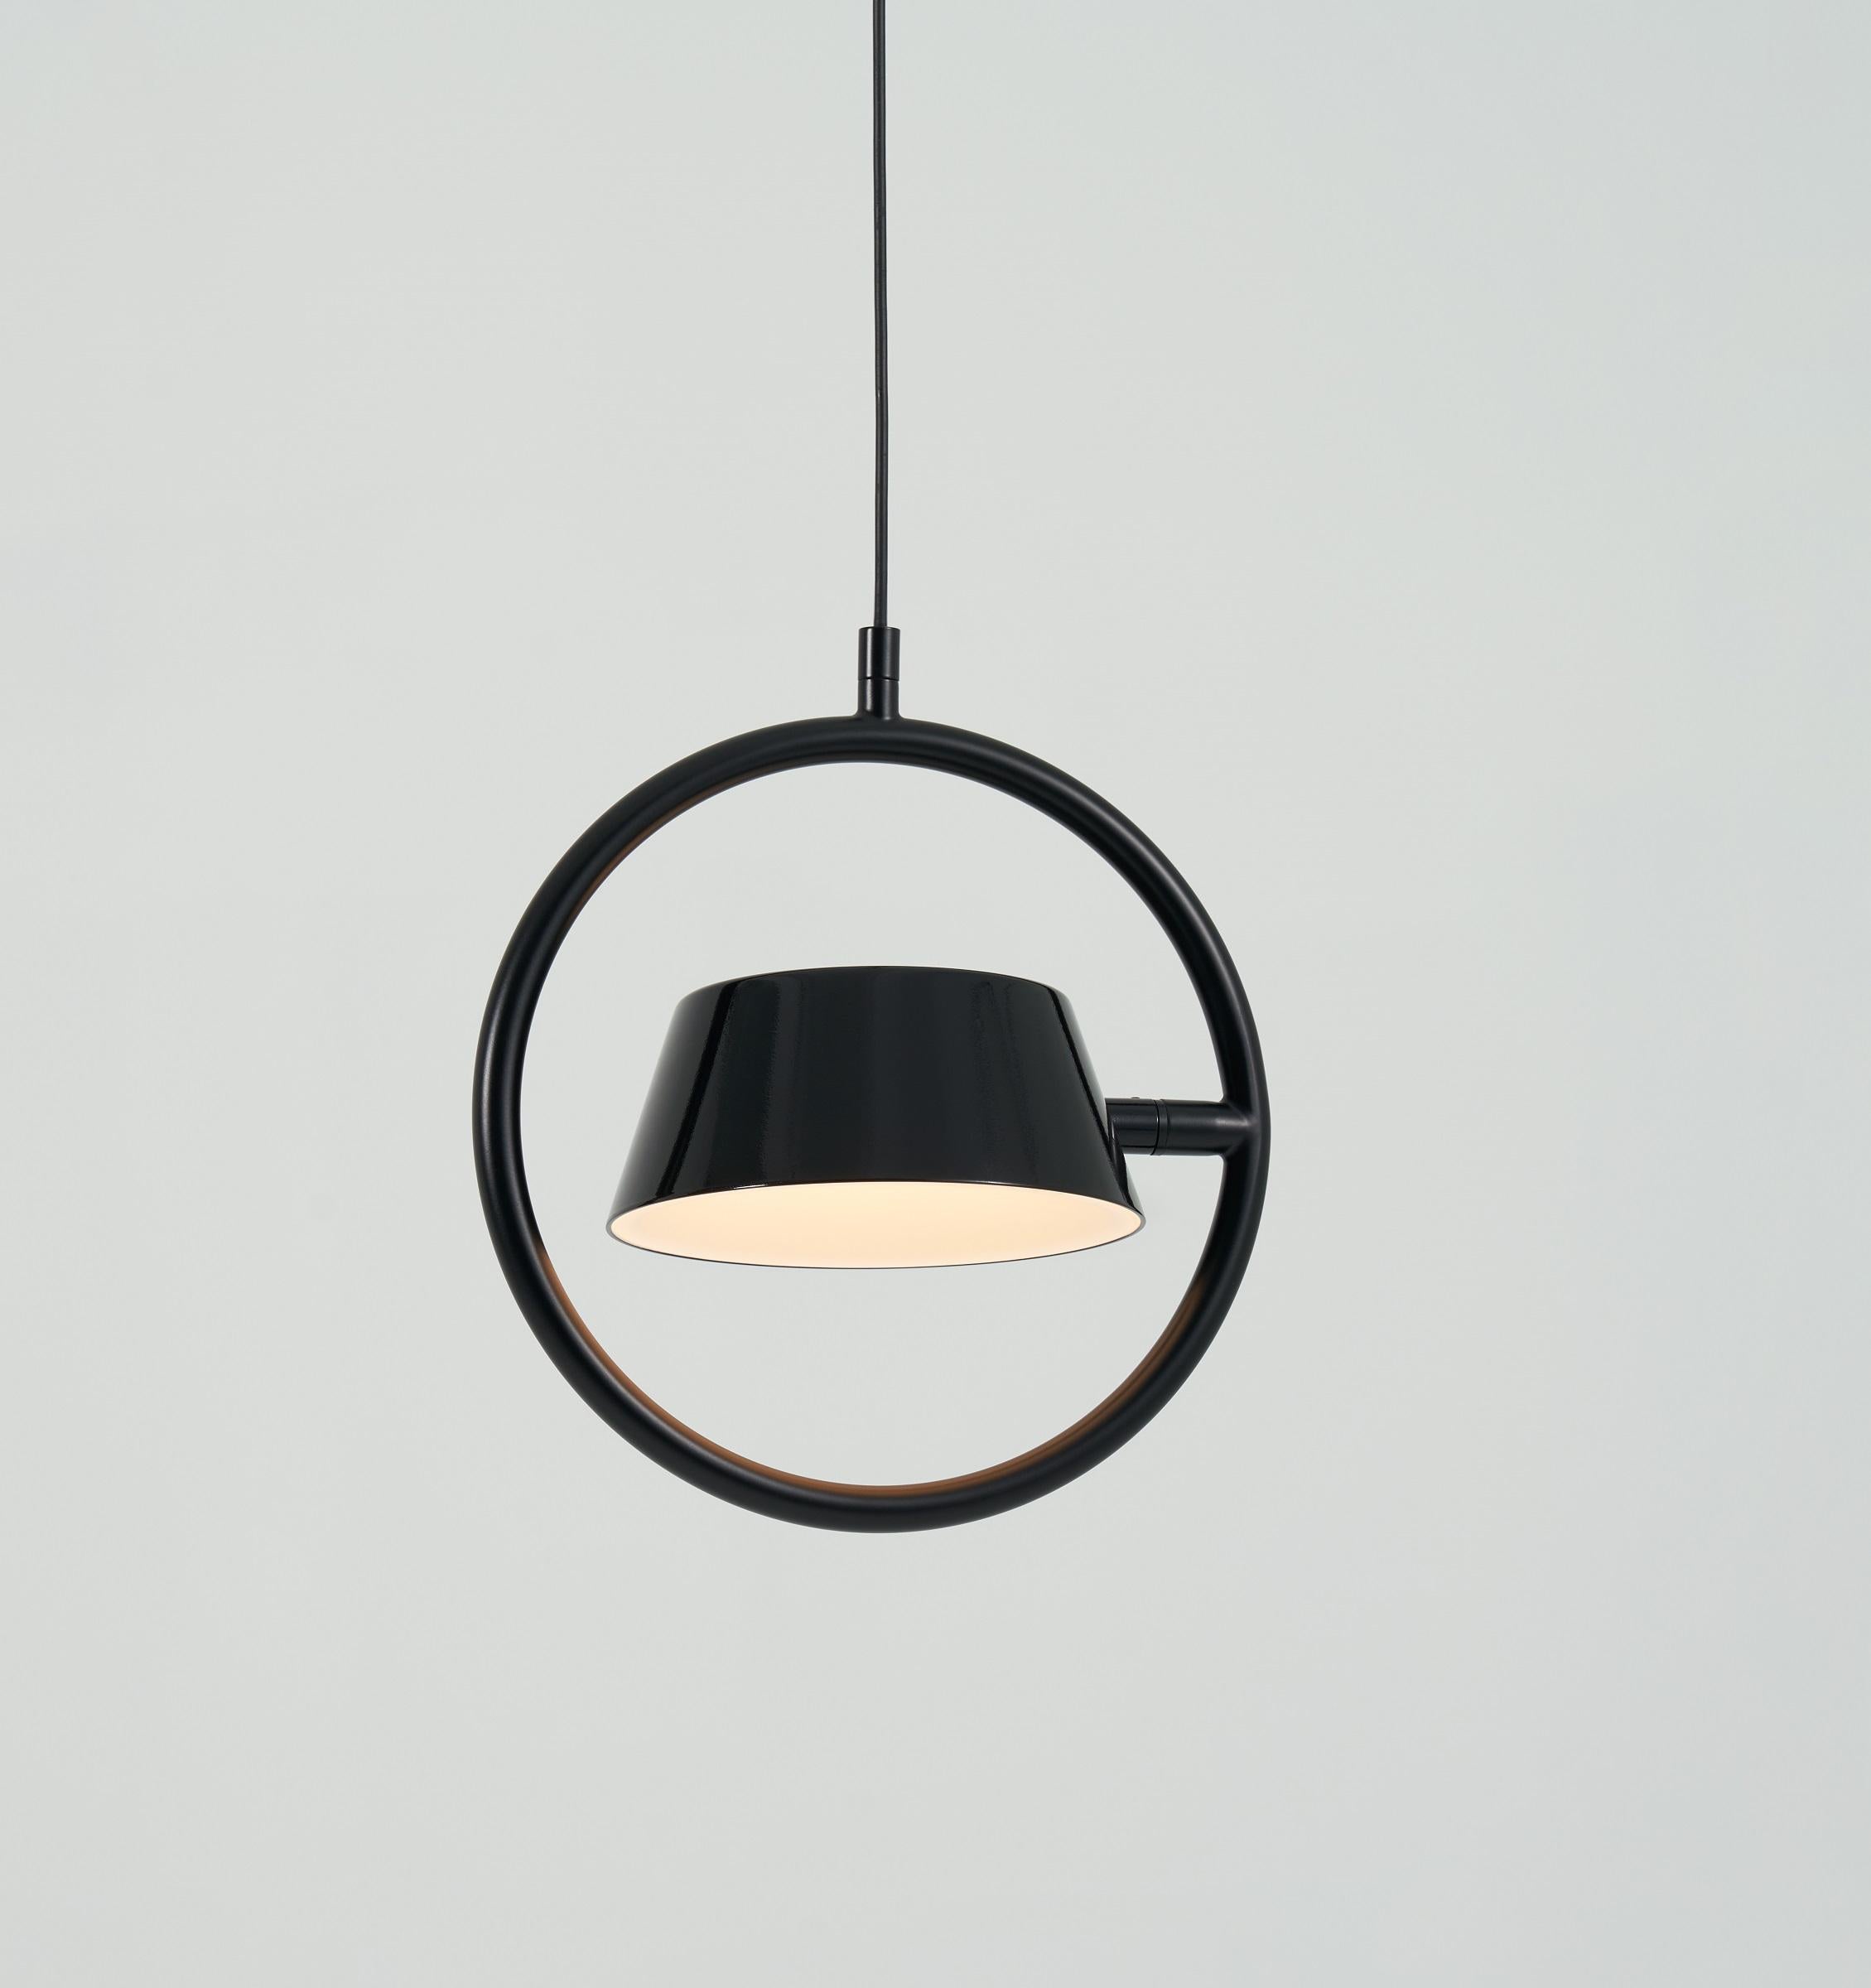 The Olo ring collection seamlessly combines the basic elements of circle and line. The dimmable Olo ring pendant is adjustable up to 290 degrees, offered added flexiblity. The Olo ring collection maintains the Olo signature design with the unique